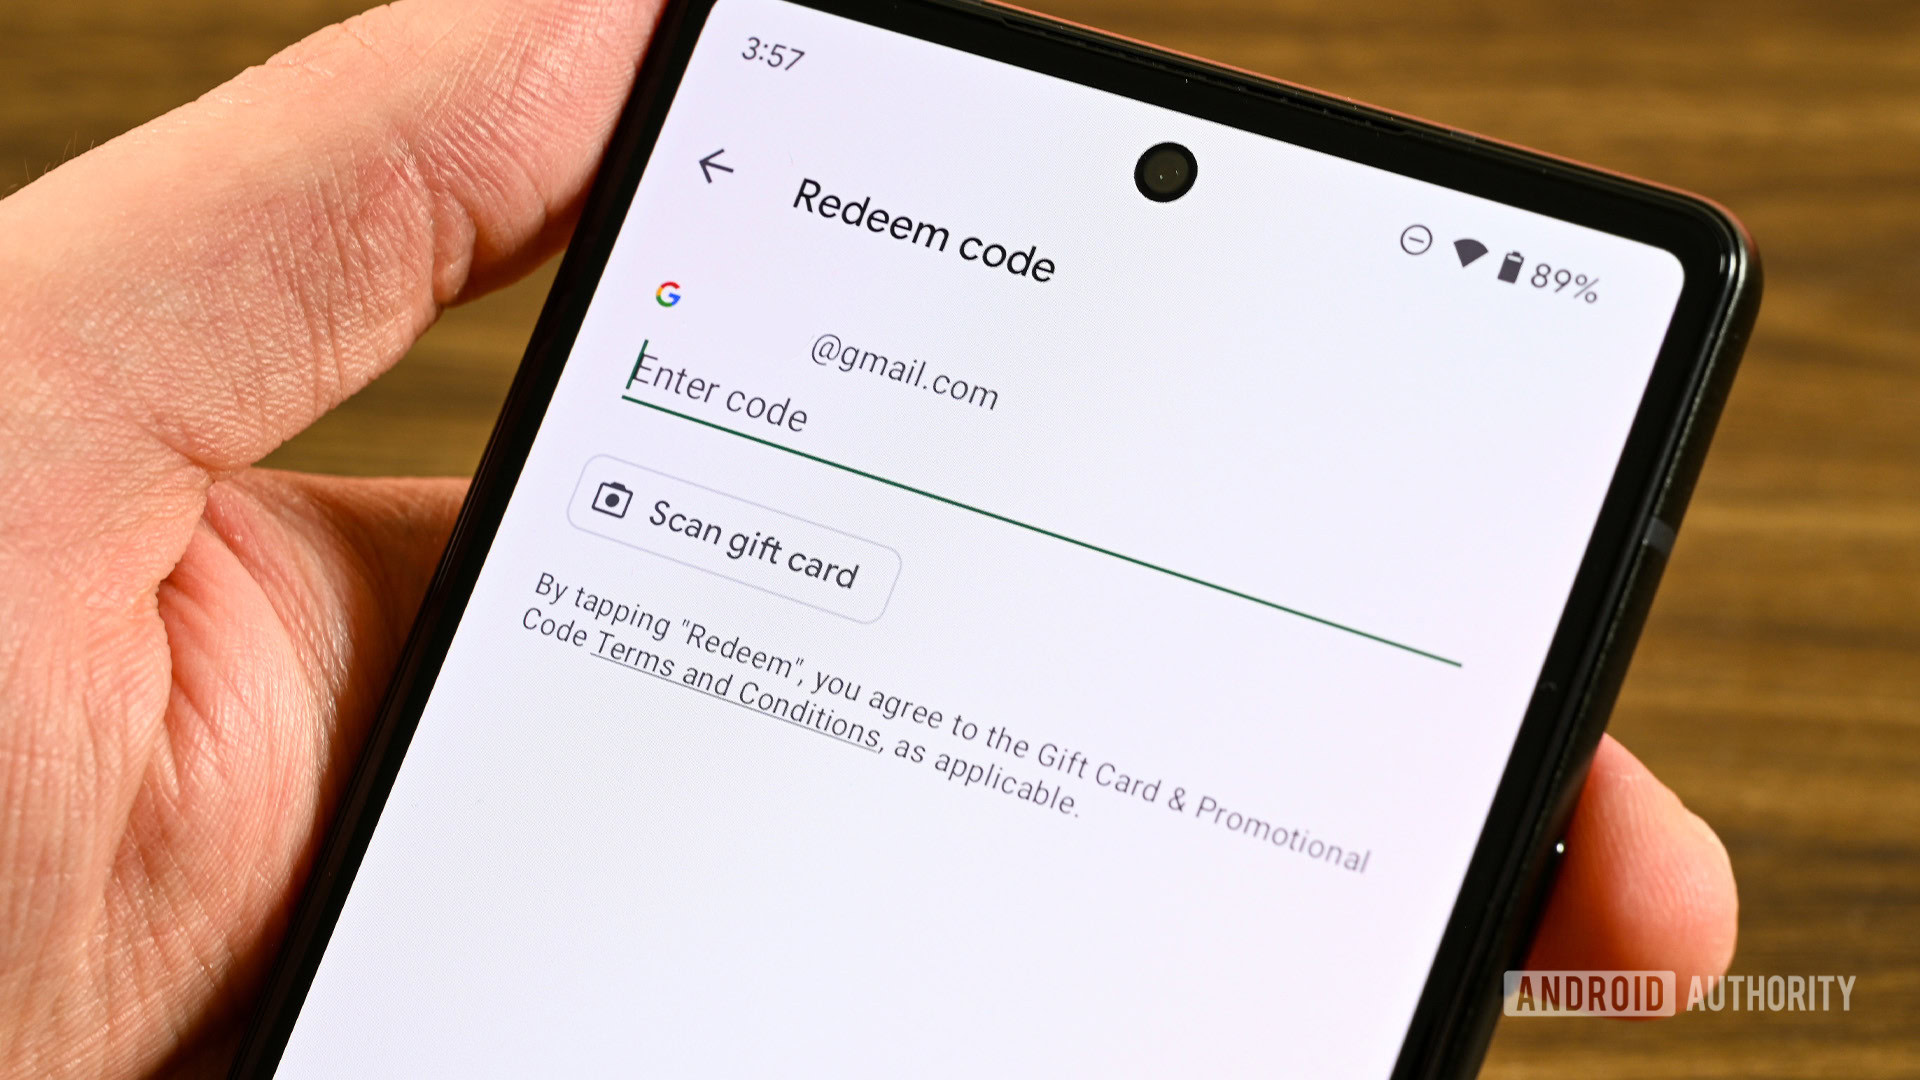 Promo codes, Google Play's billing system